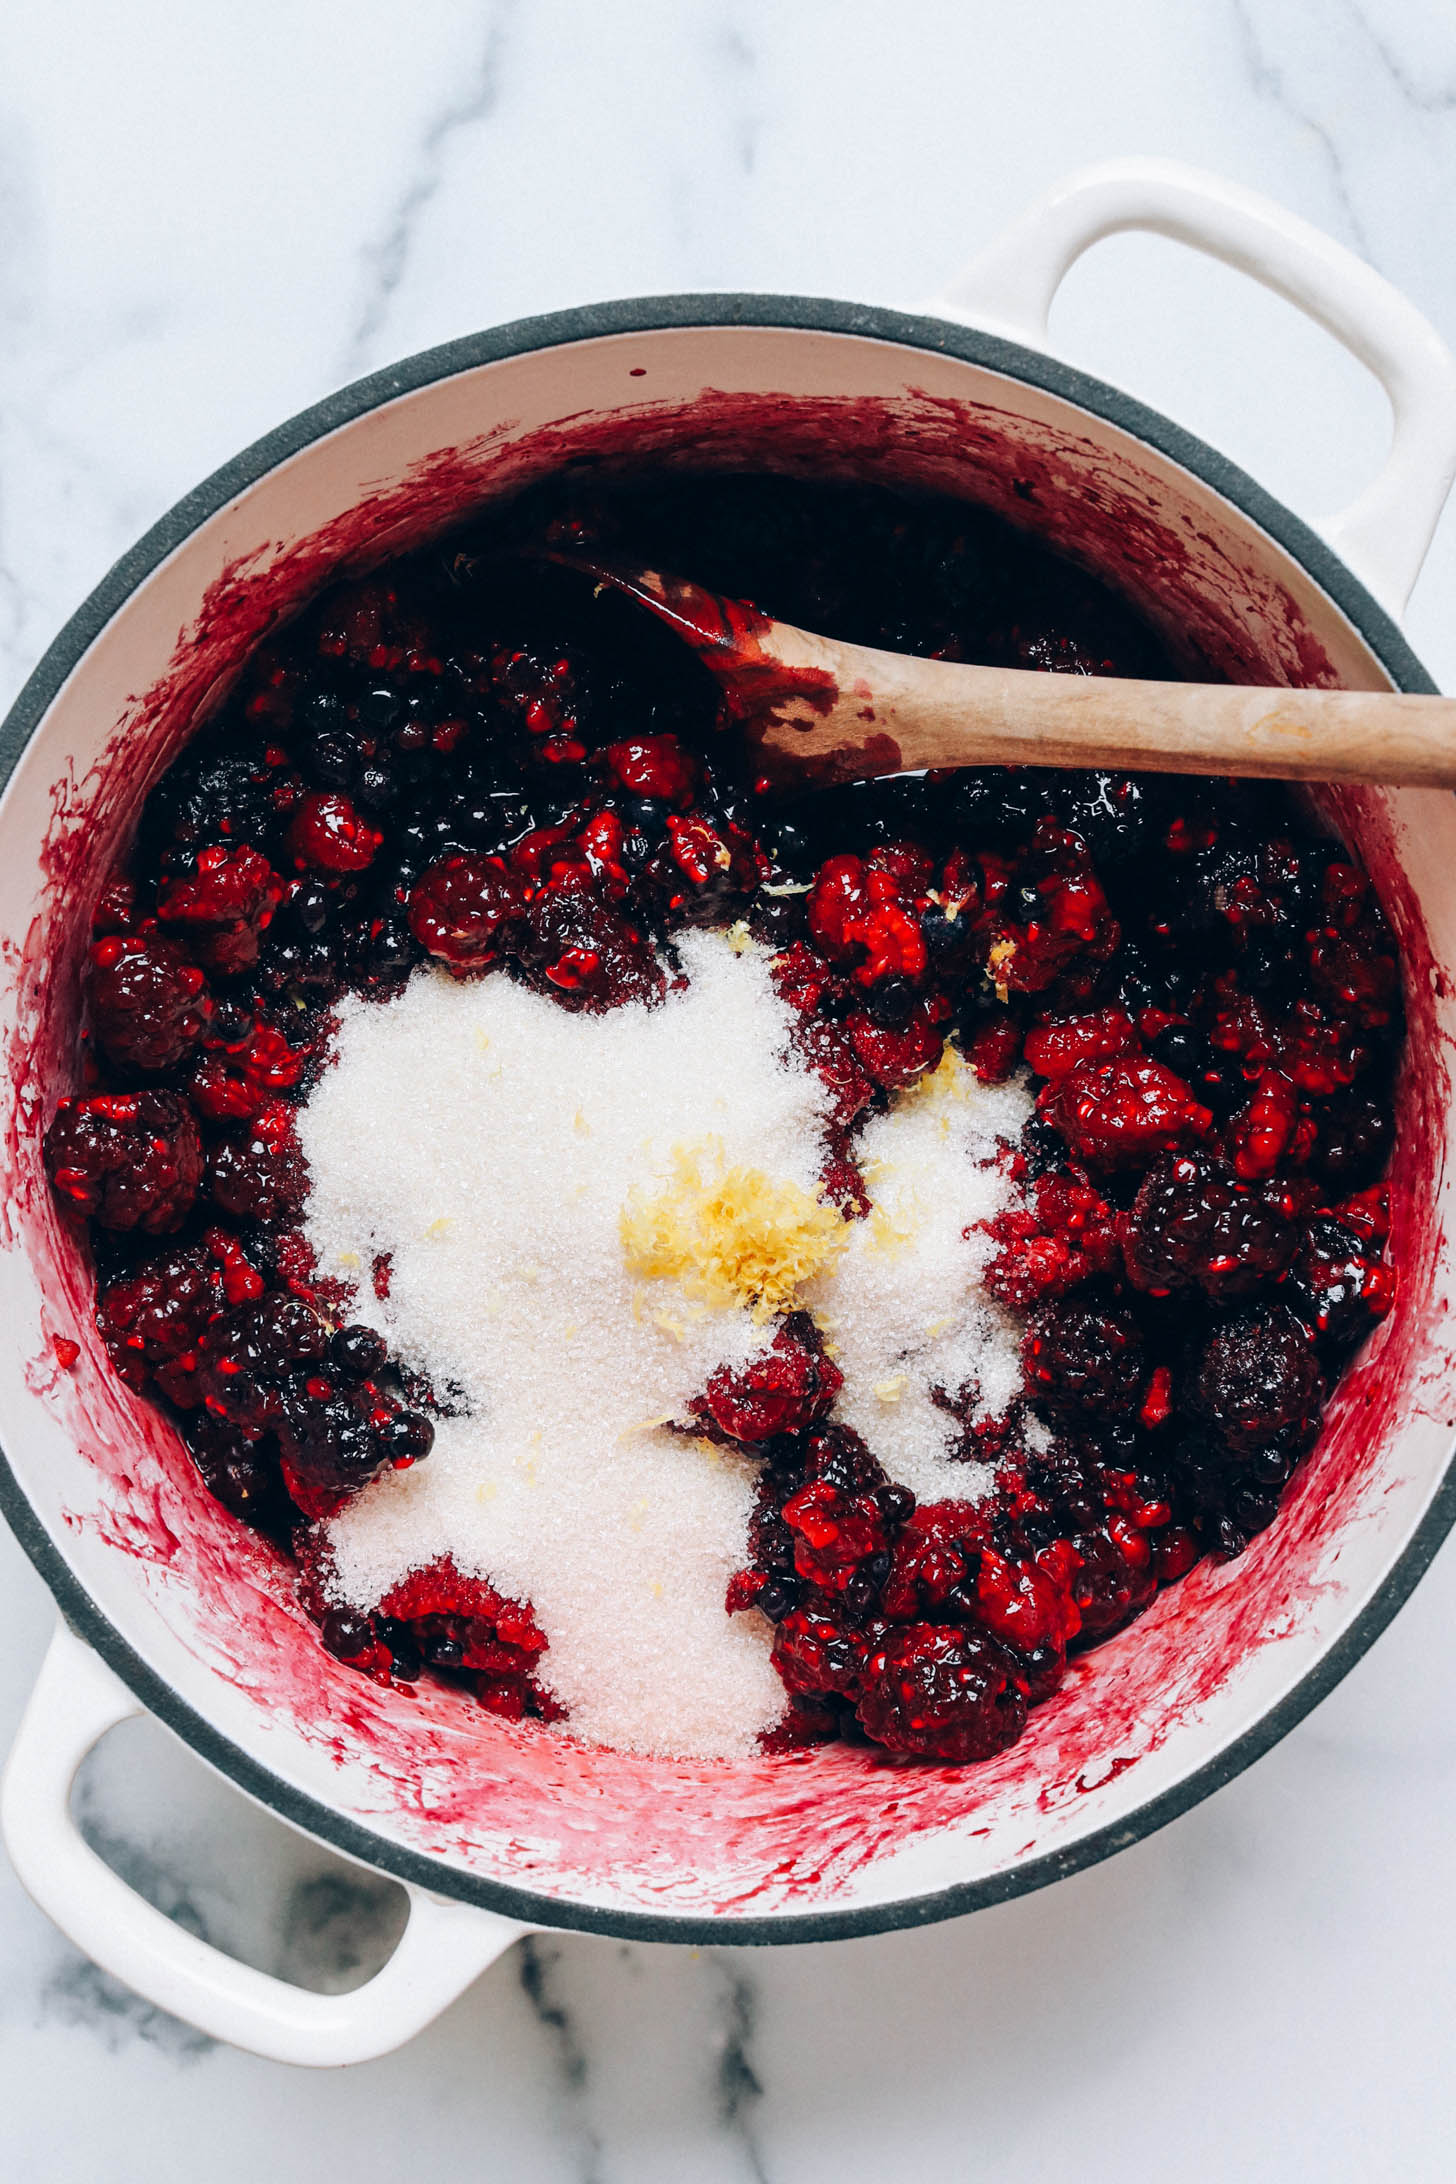 Sugar and lemon zest in a pan of saucy mixed berries